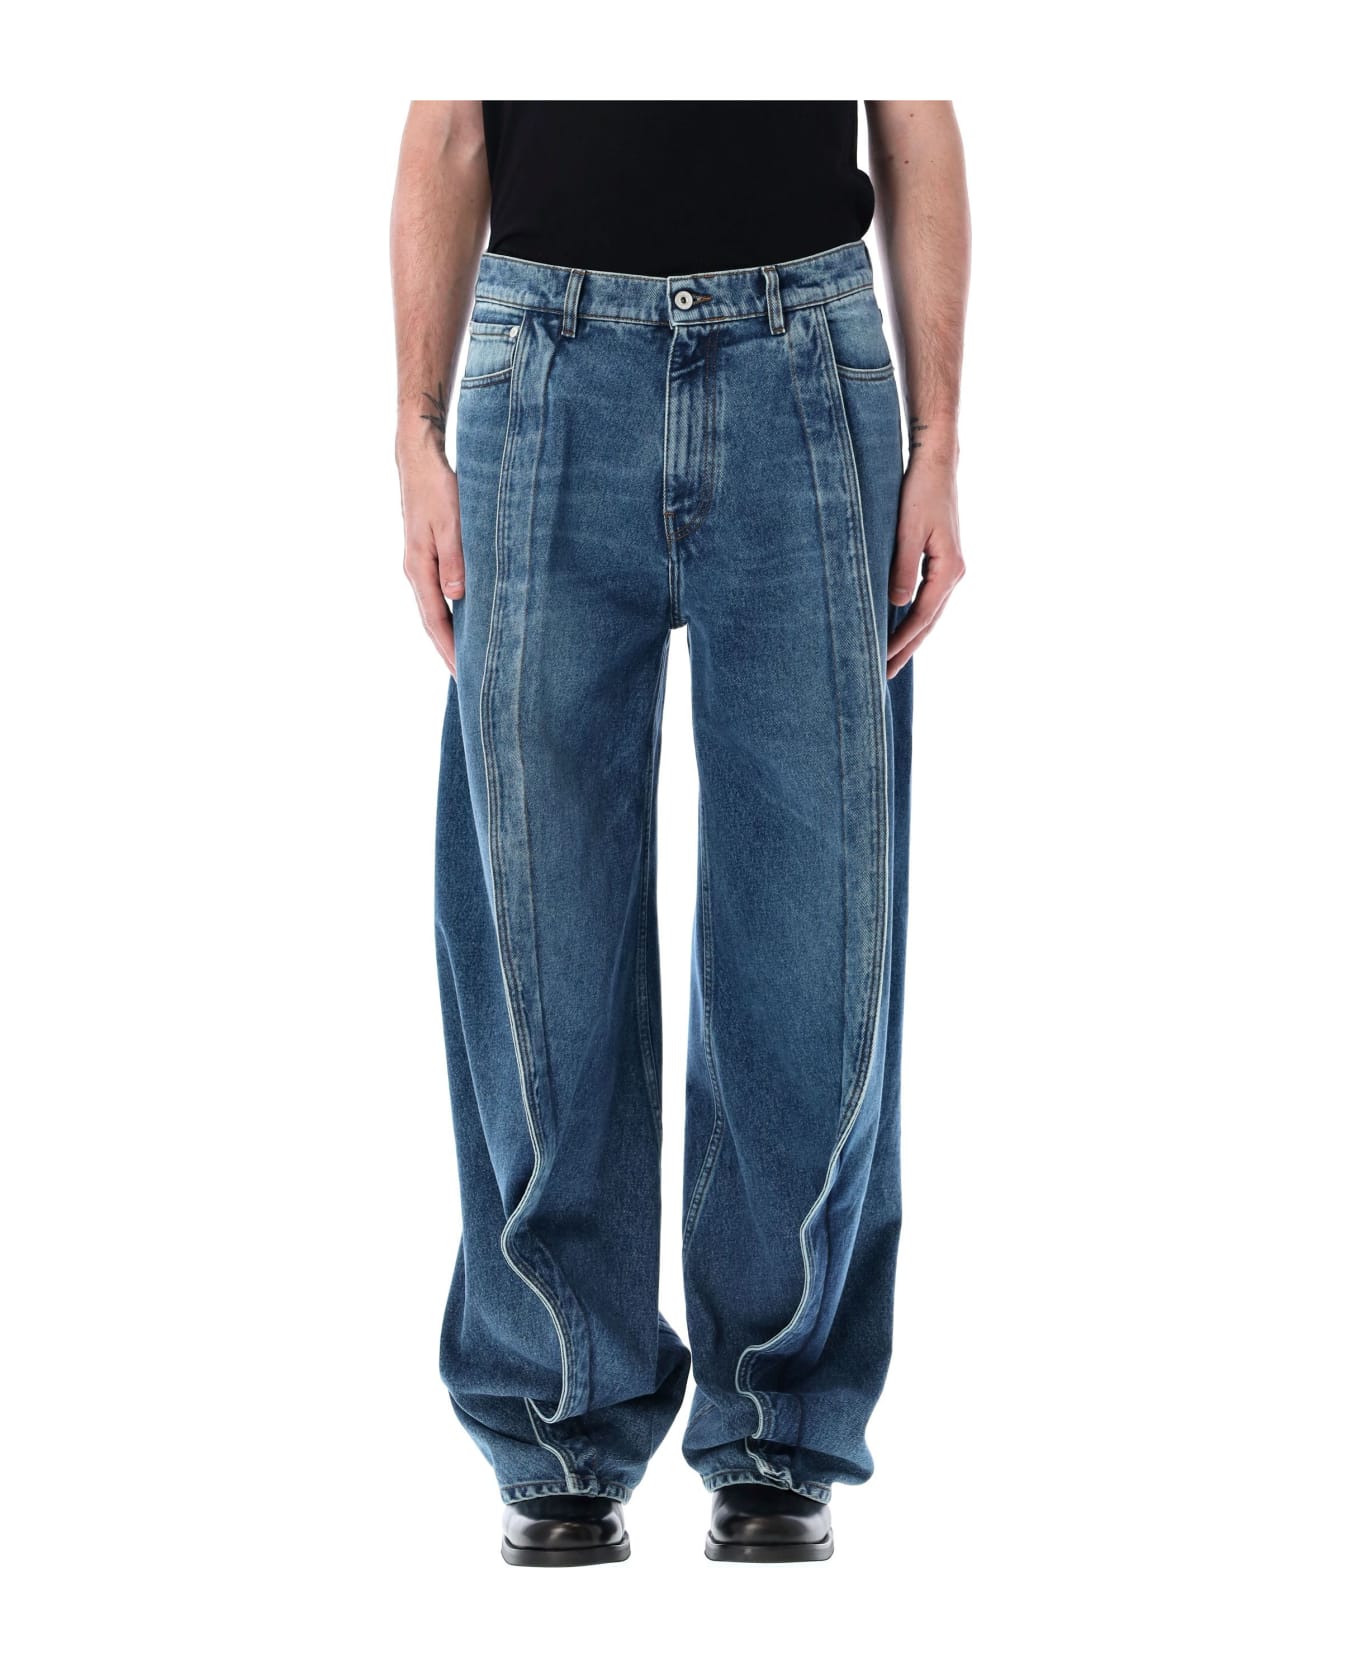 Y/Project Evergreen Banana Jeans - EVERGREEN VINTAGE BLUE